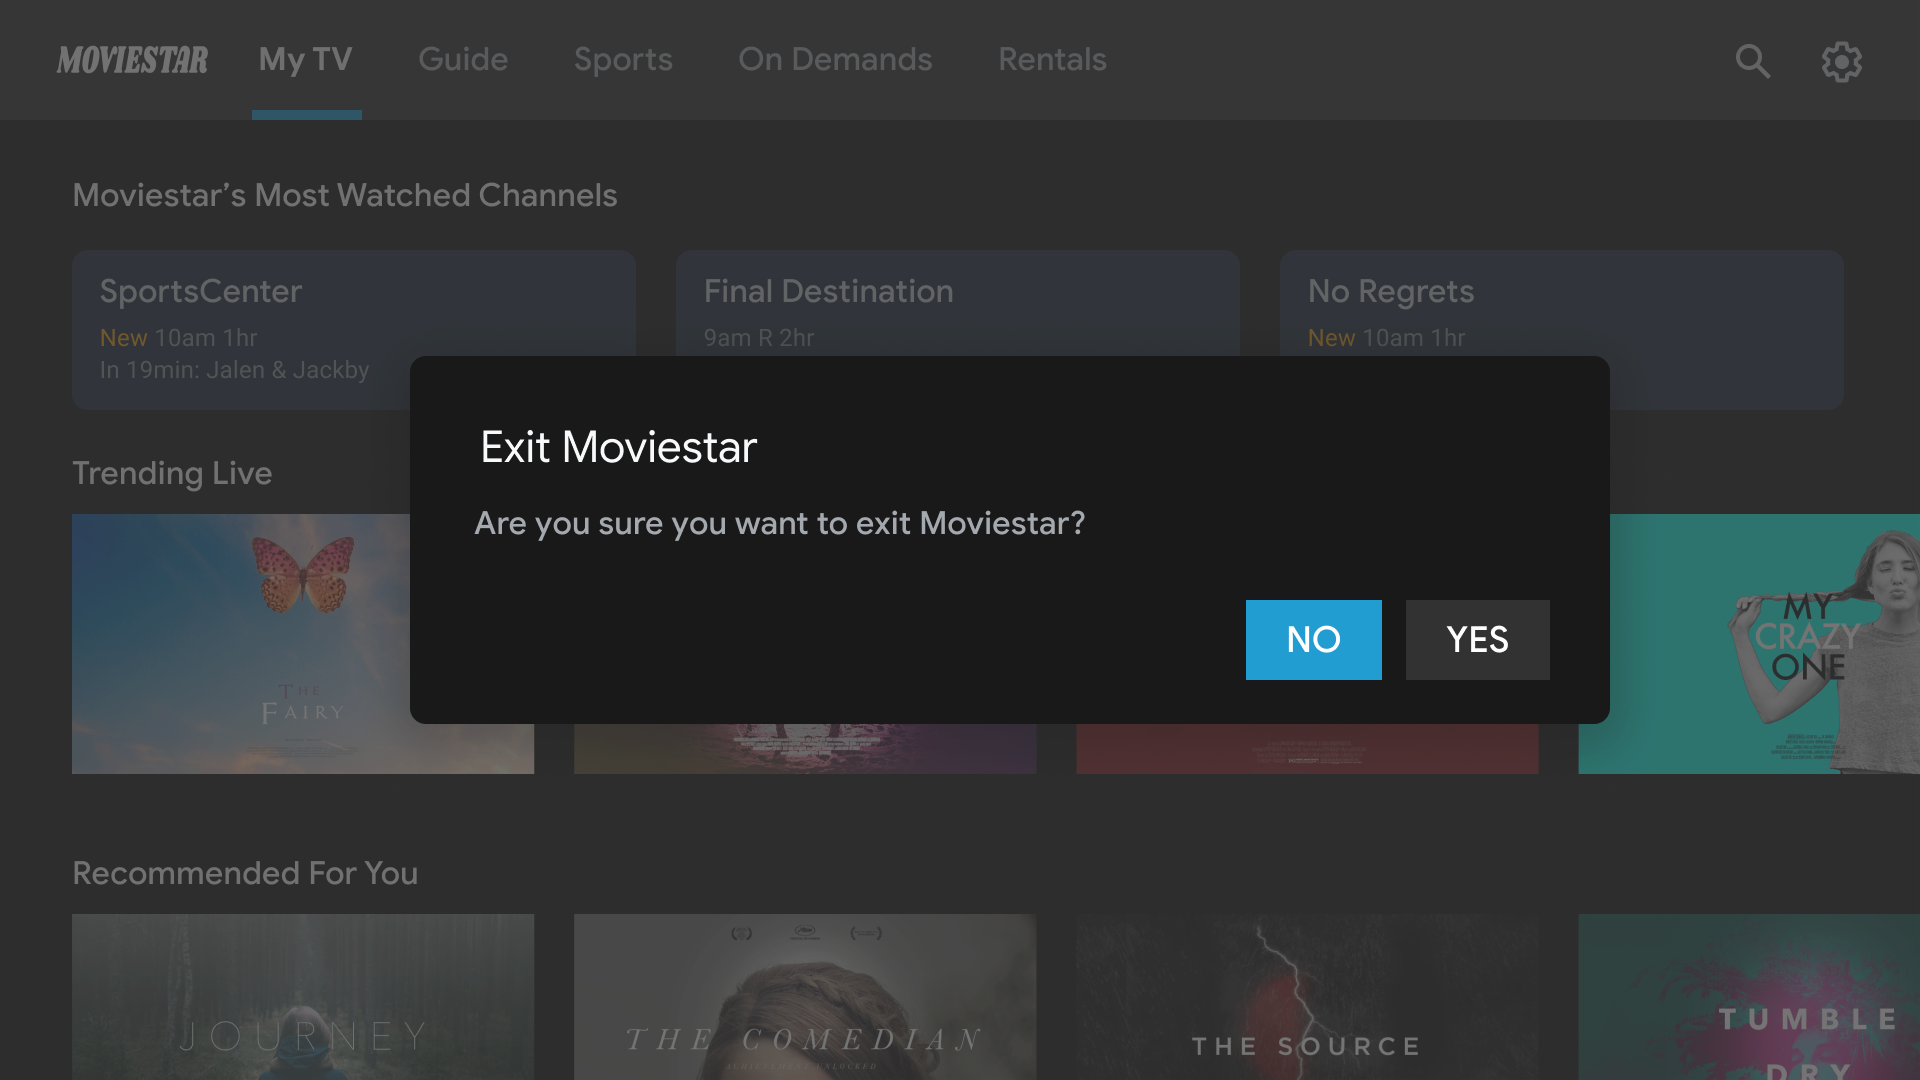 Screenshot showing a dialog asking users if they want to exit